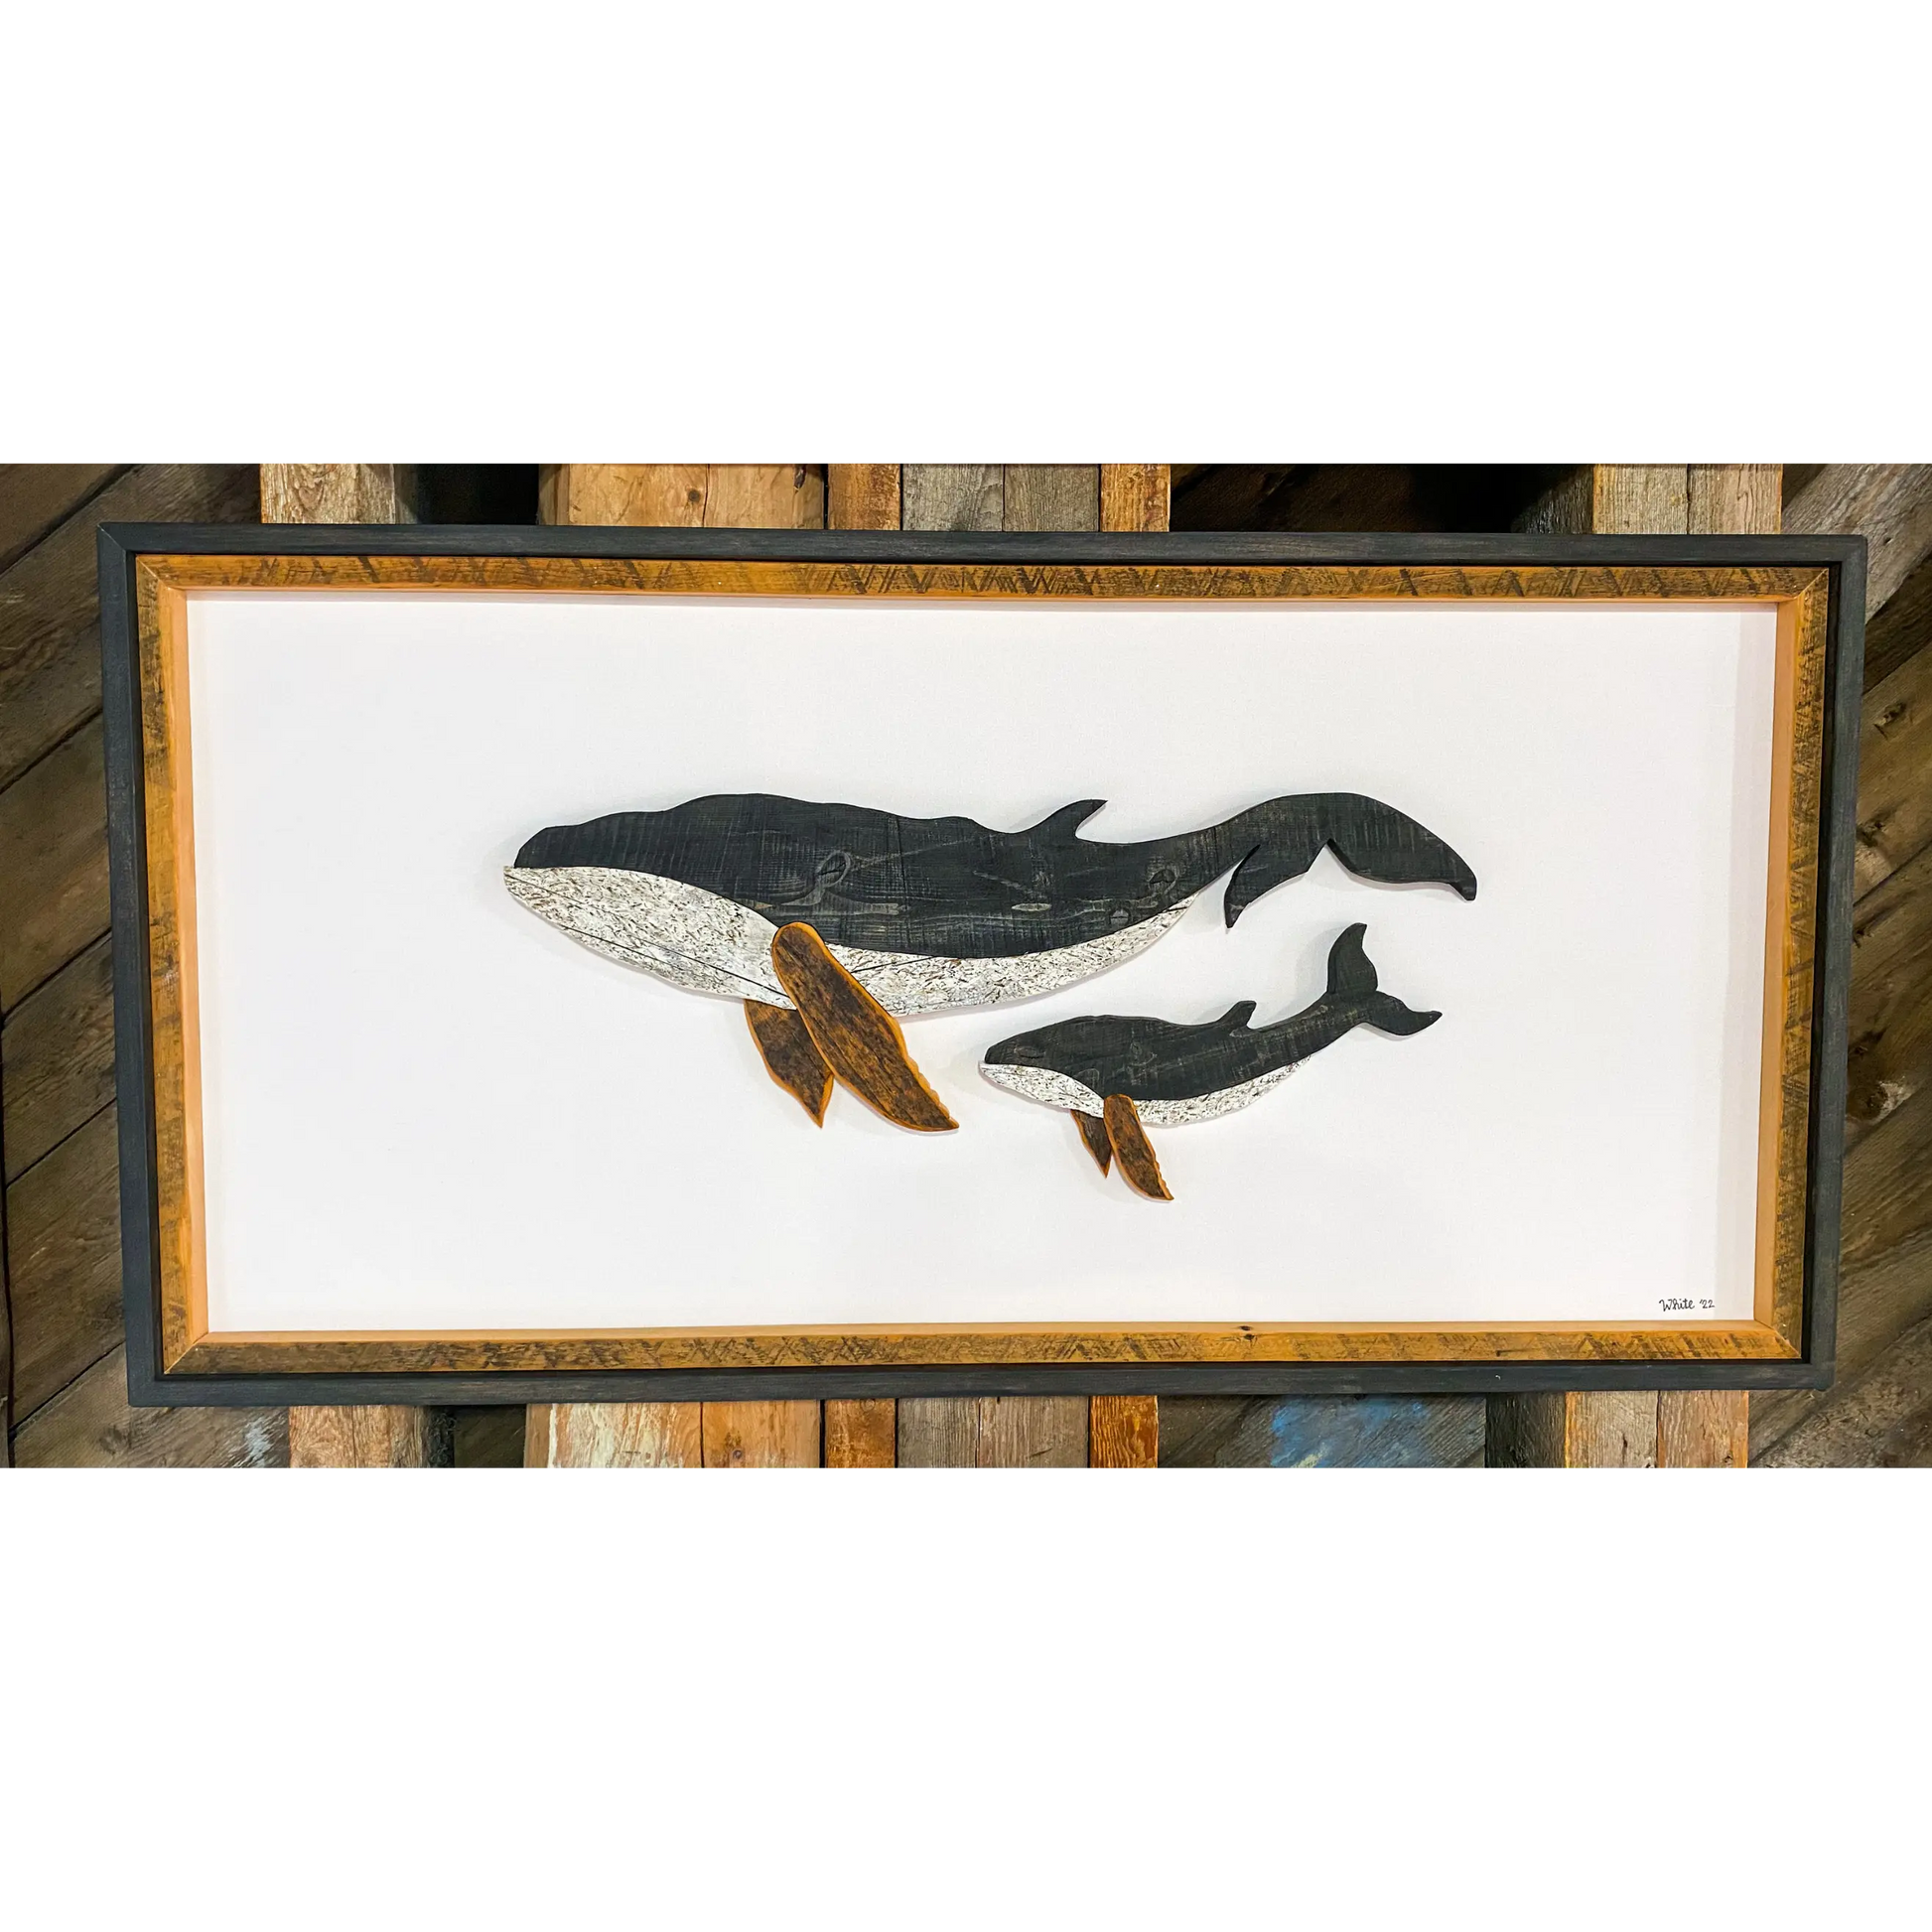 The White's Emporium's "The Mother- Water Street Series" driftwood art piece features two humpback whales made from reclaimed wood and driftwood sourced in Newfoundland.